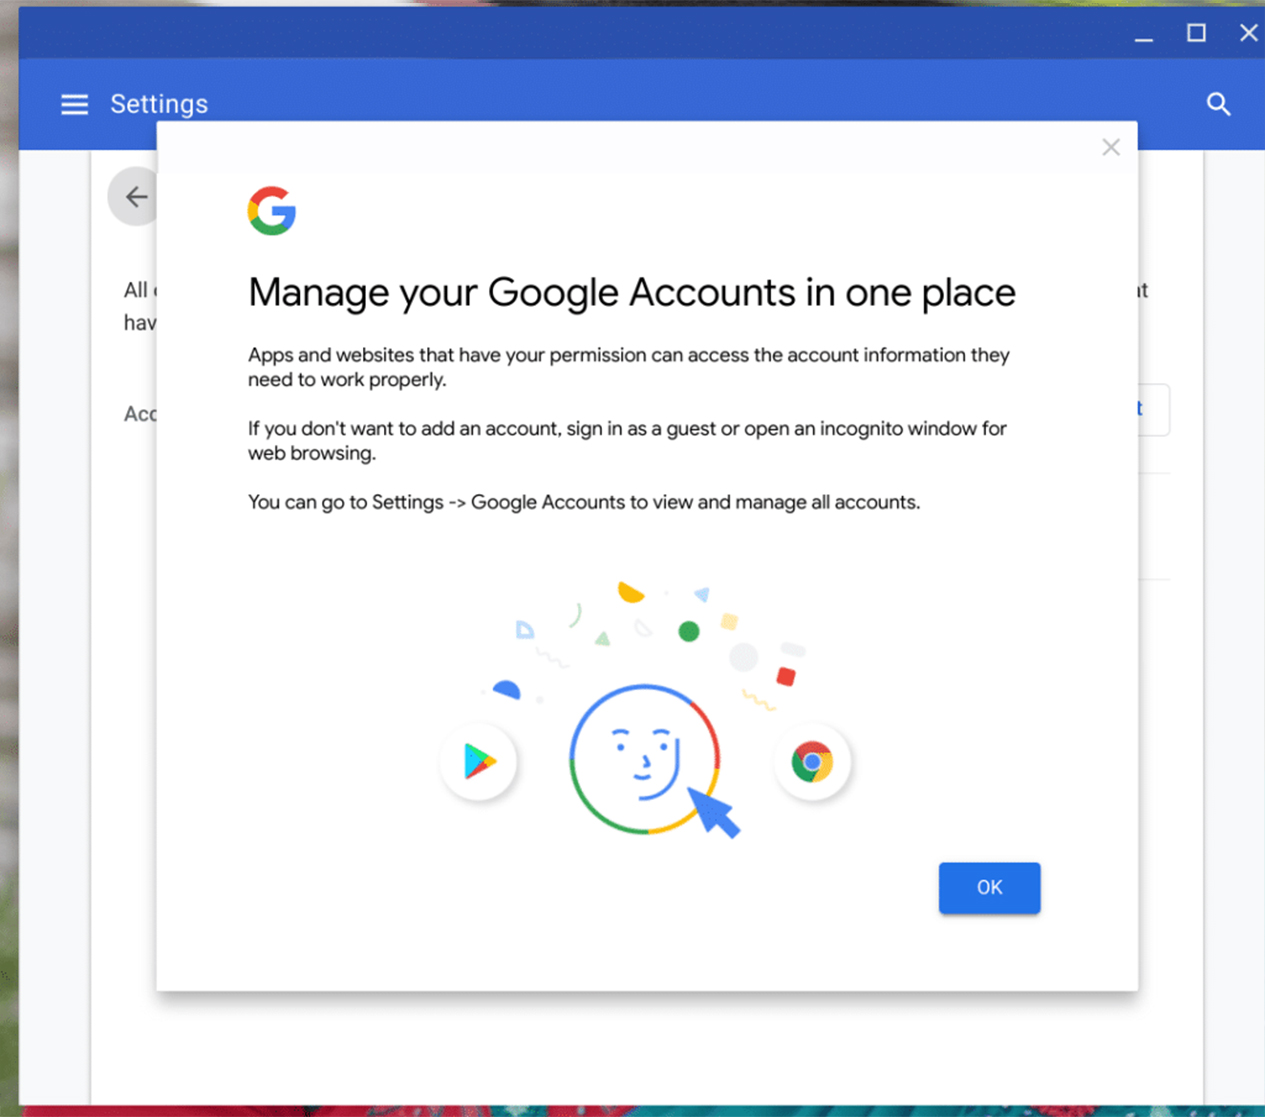 Chrome OS multi-account support